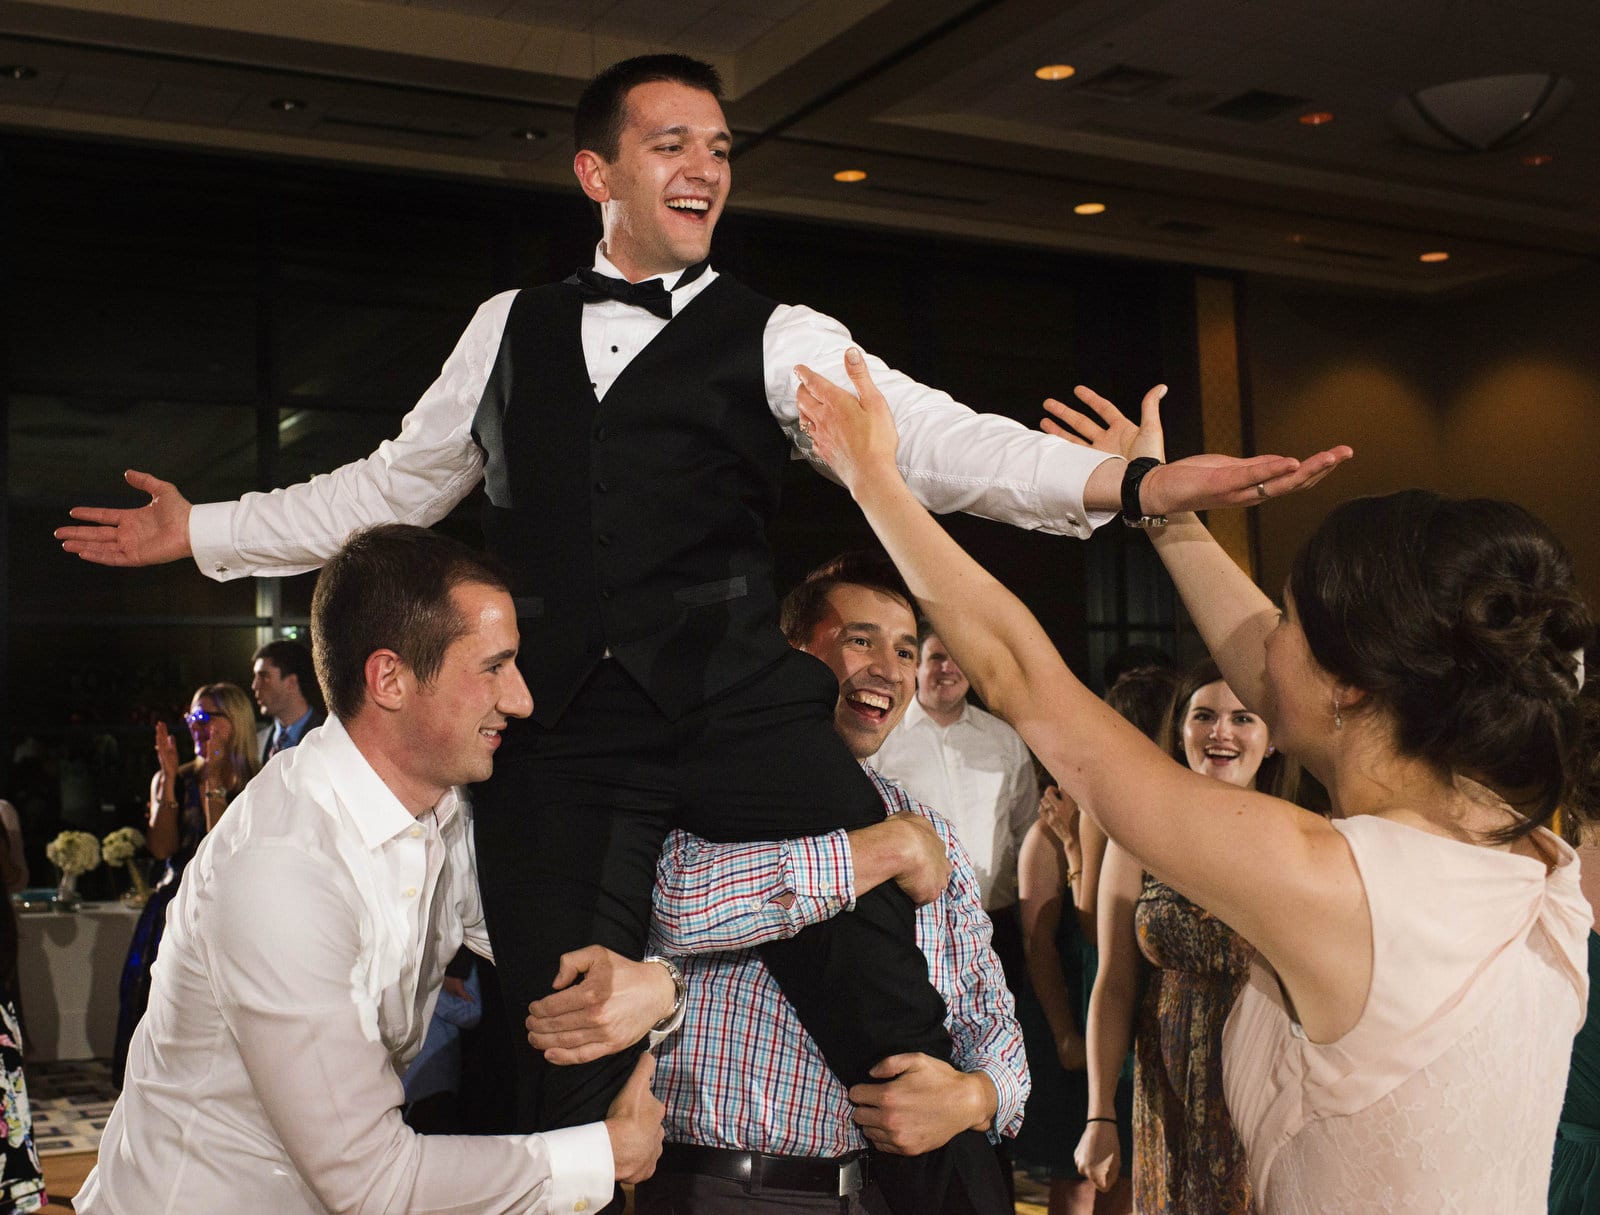 A bride reaches her hands up for her groom who is carried to her by two wedding guests during their reception at the Duquesne University Power Center.